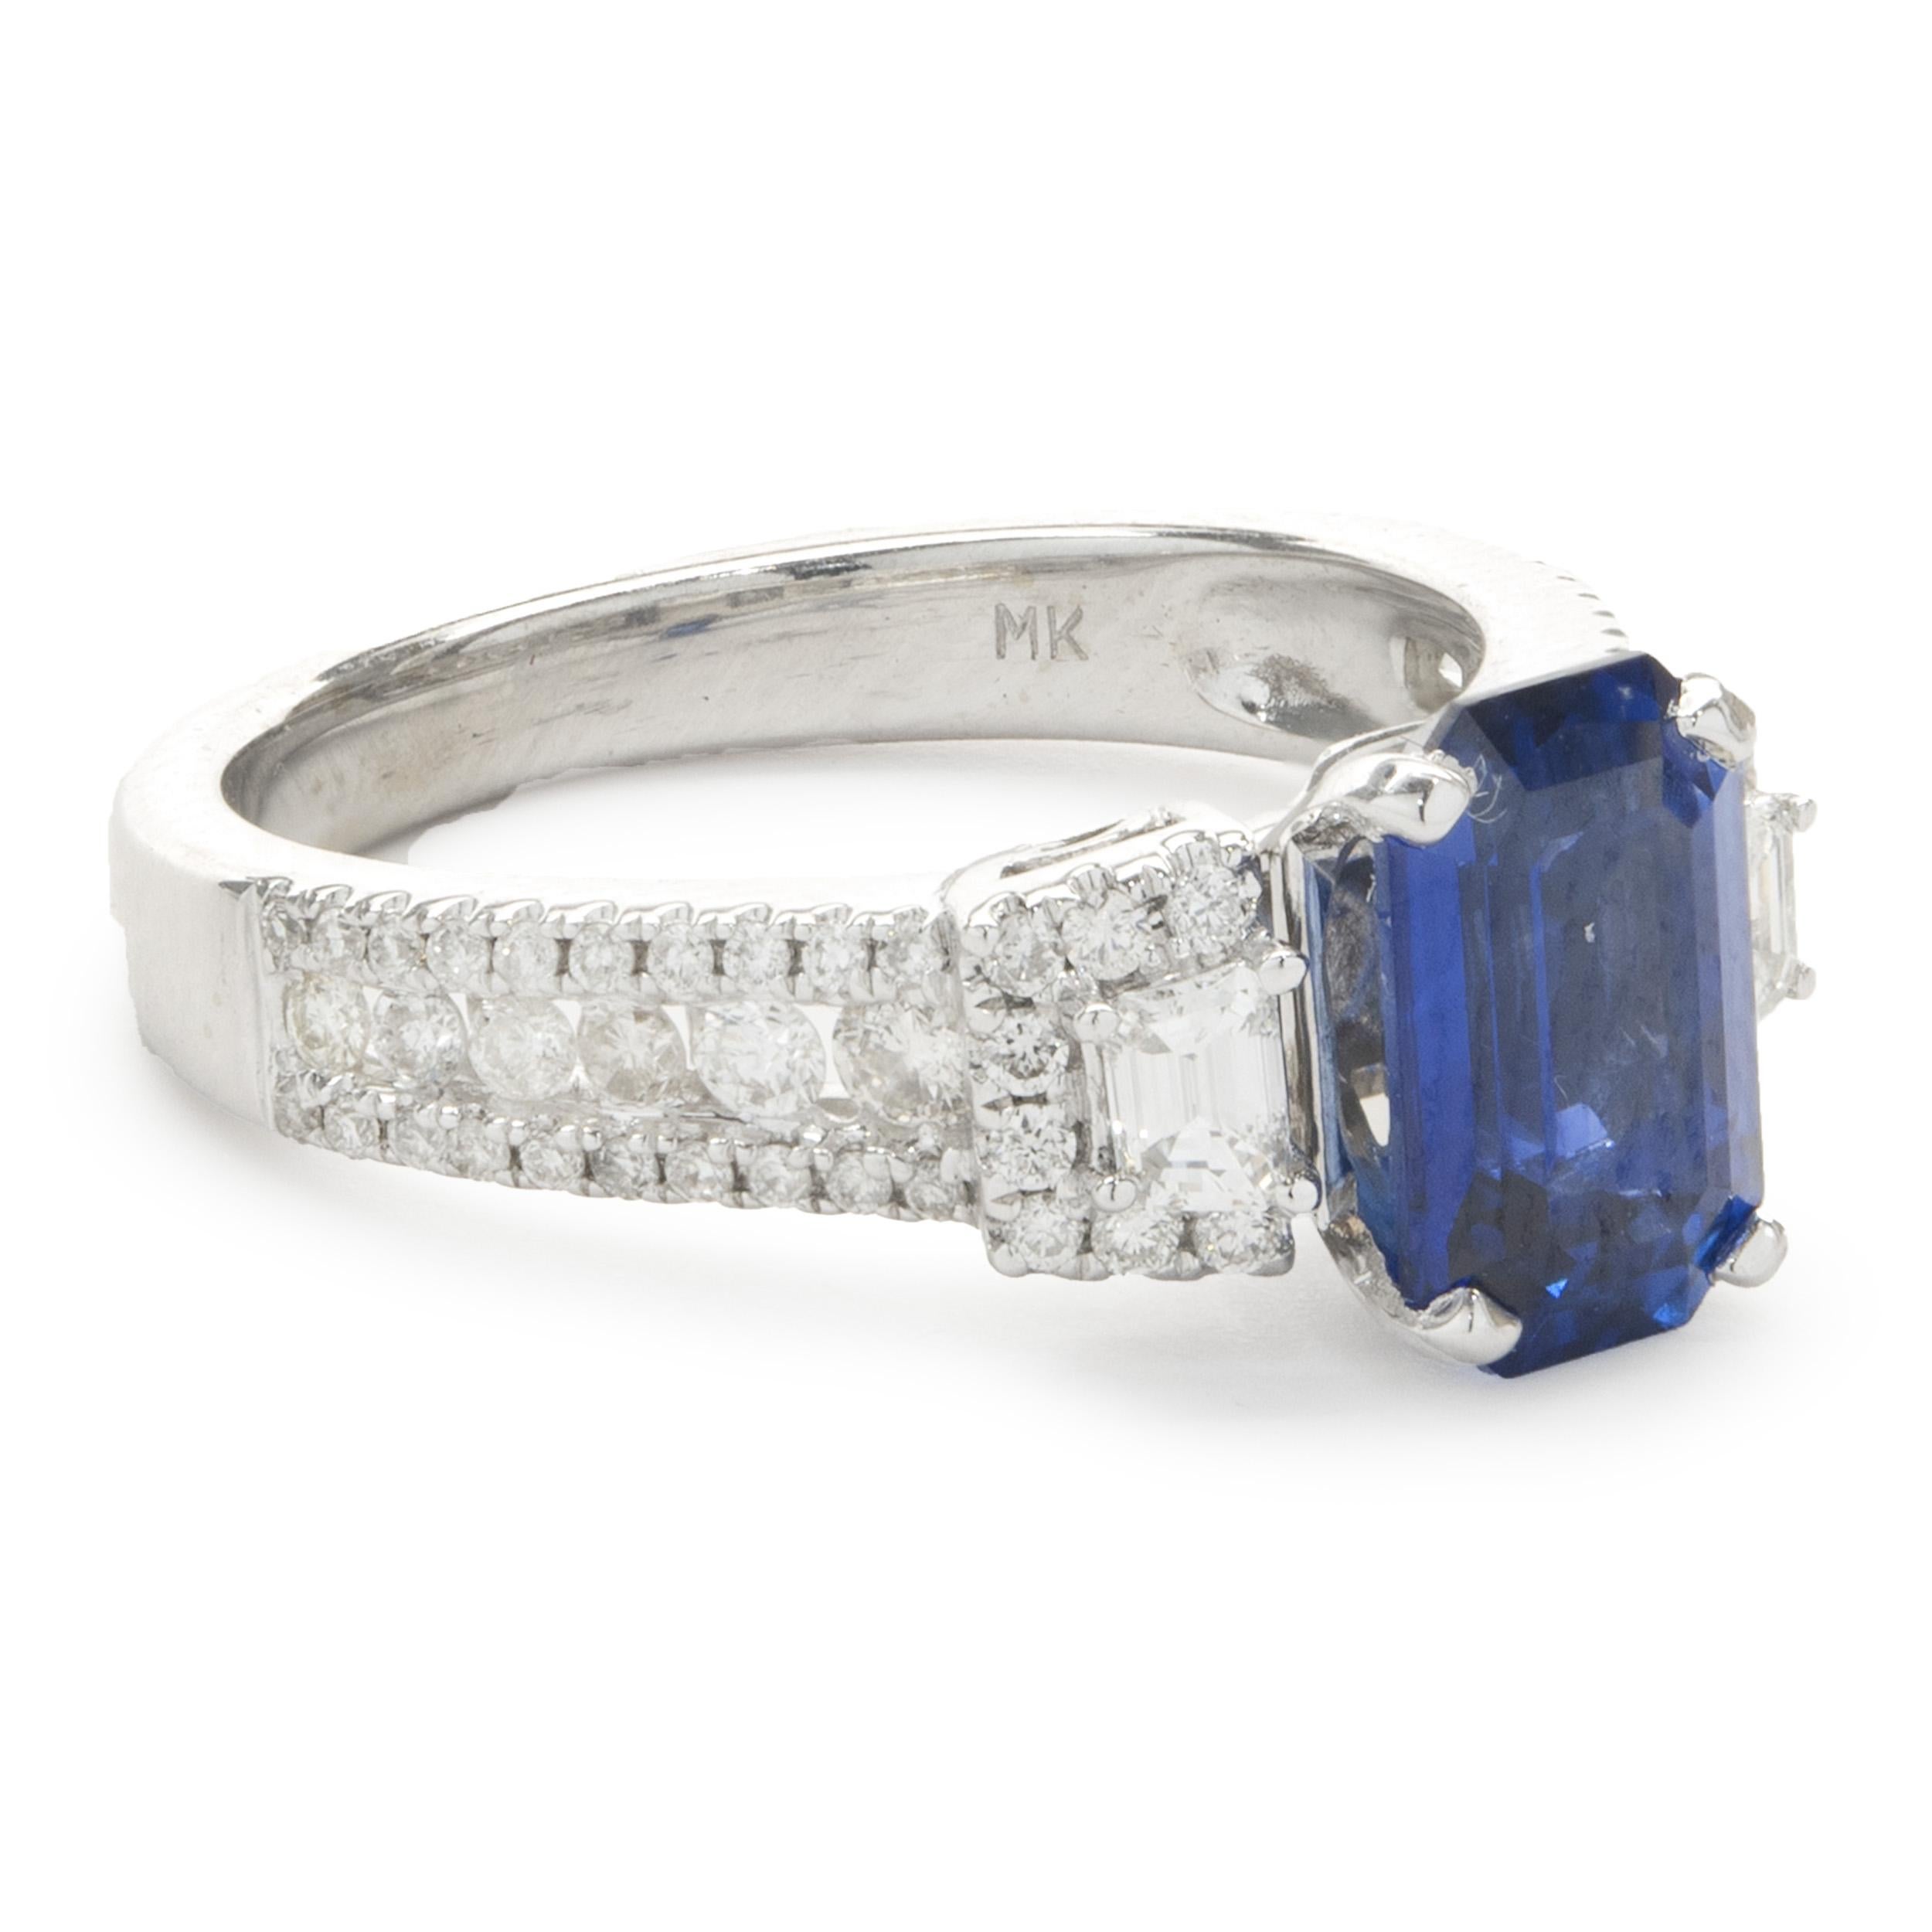 Designer: custom
Material: 14K white gold
Diamond: 70 round brilliant / trapezoid = 1.60cttw
Color: G
Clarity: SI1
Sapphire: 1 emerald cut = 2.13ct
Ring Size: 6.25 (please allow up to 2 additional business days for sizing requests)
Weight: 4.60 grams